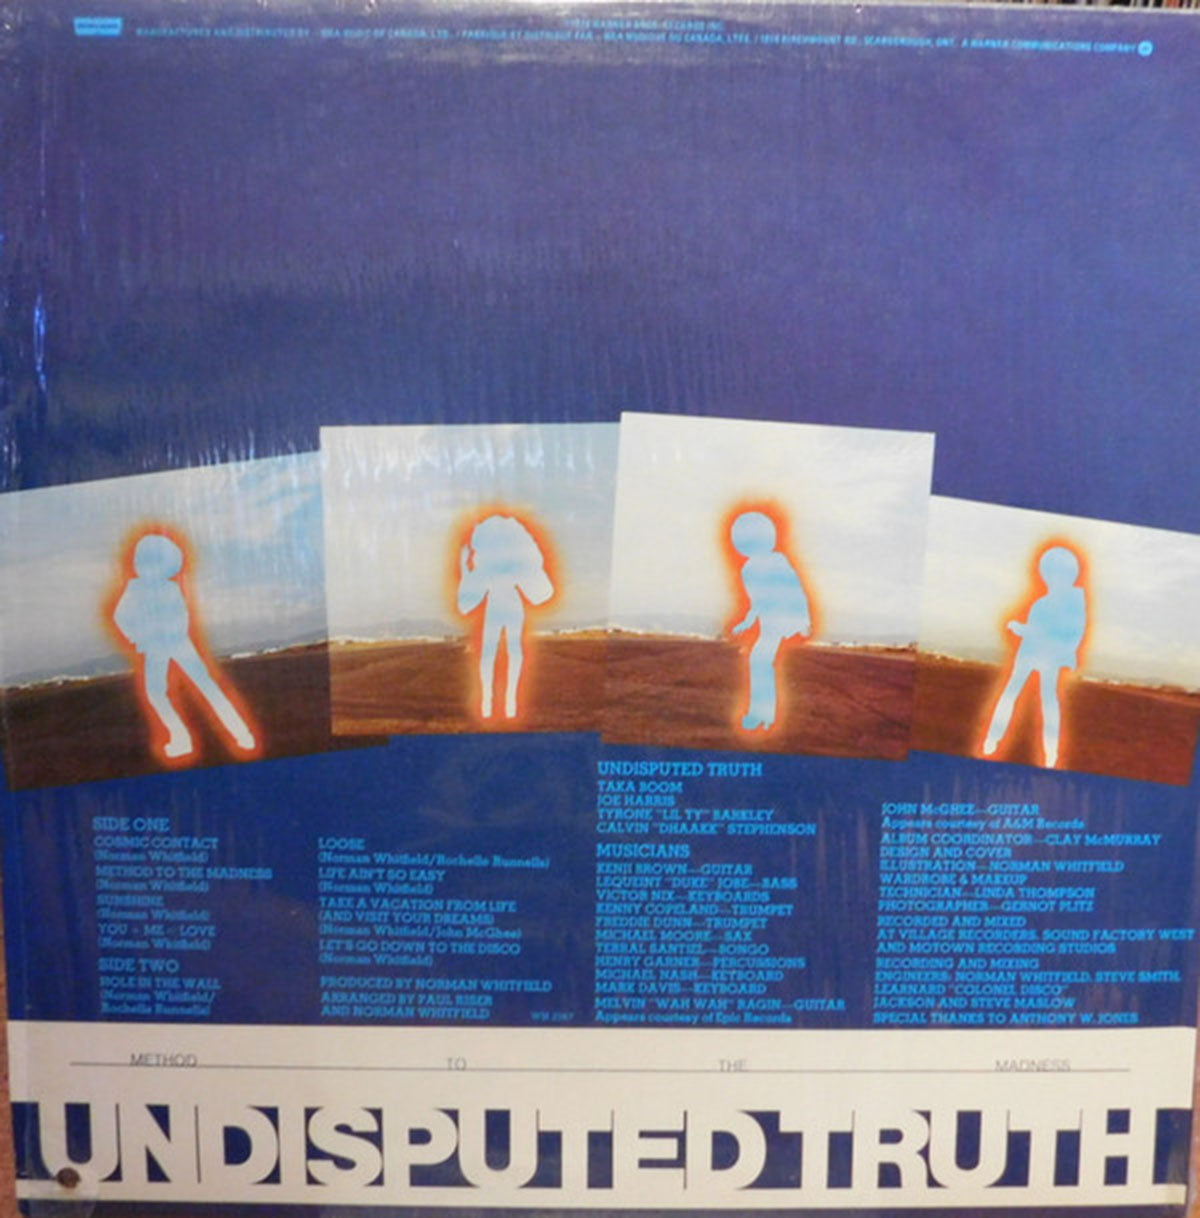 Undisputed Truth ‎– Method To The Madness - 1976